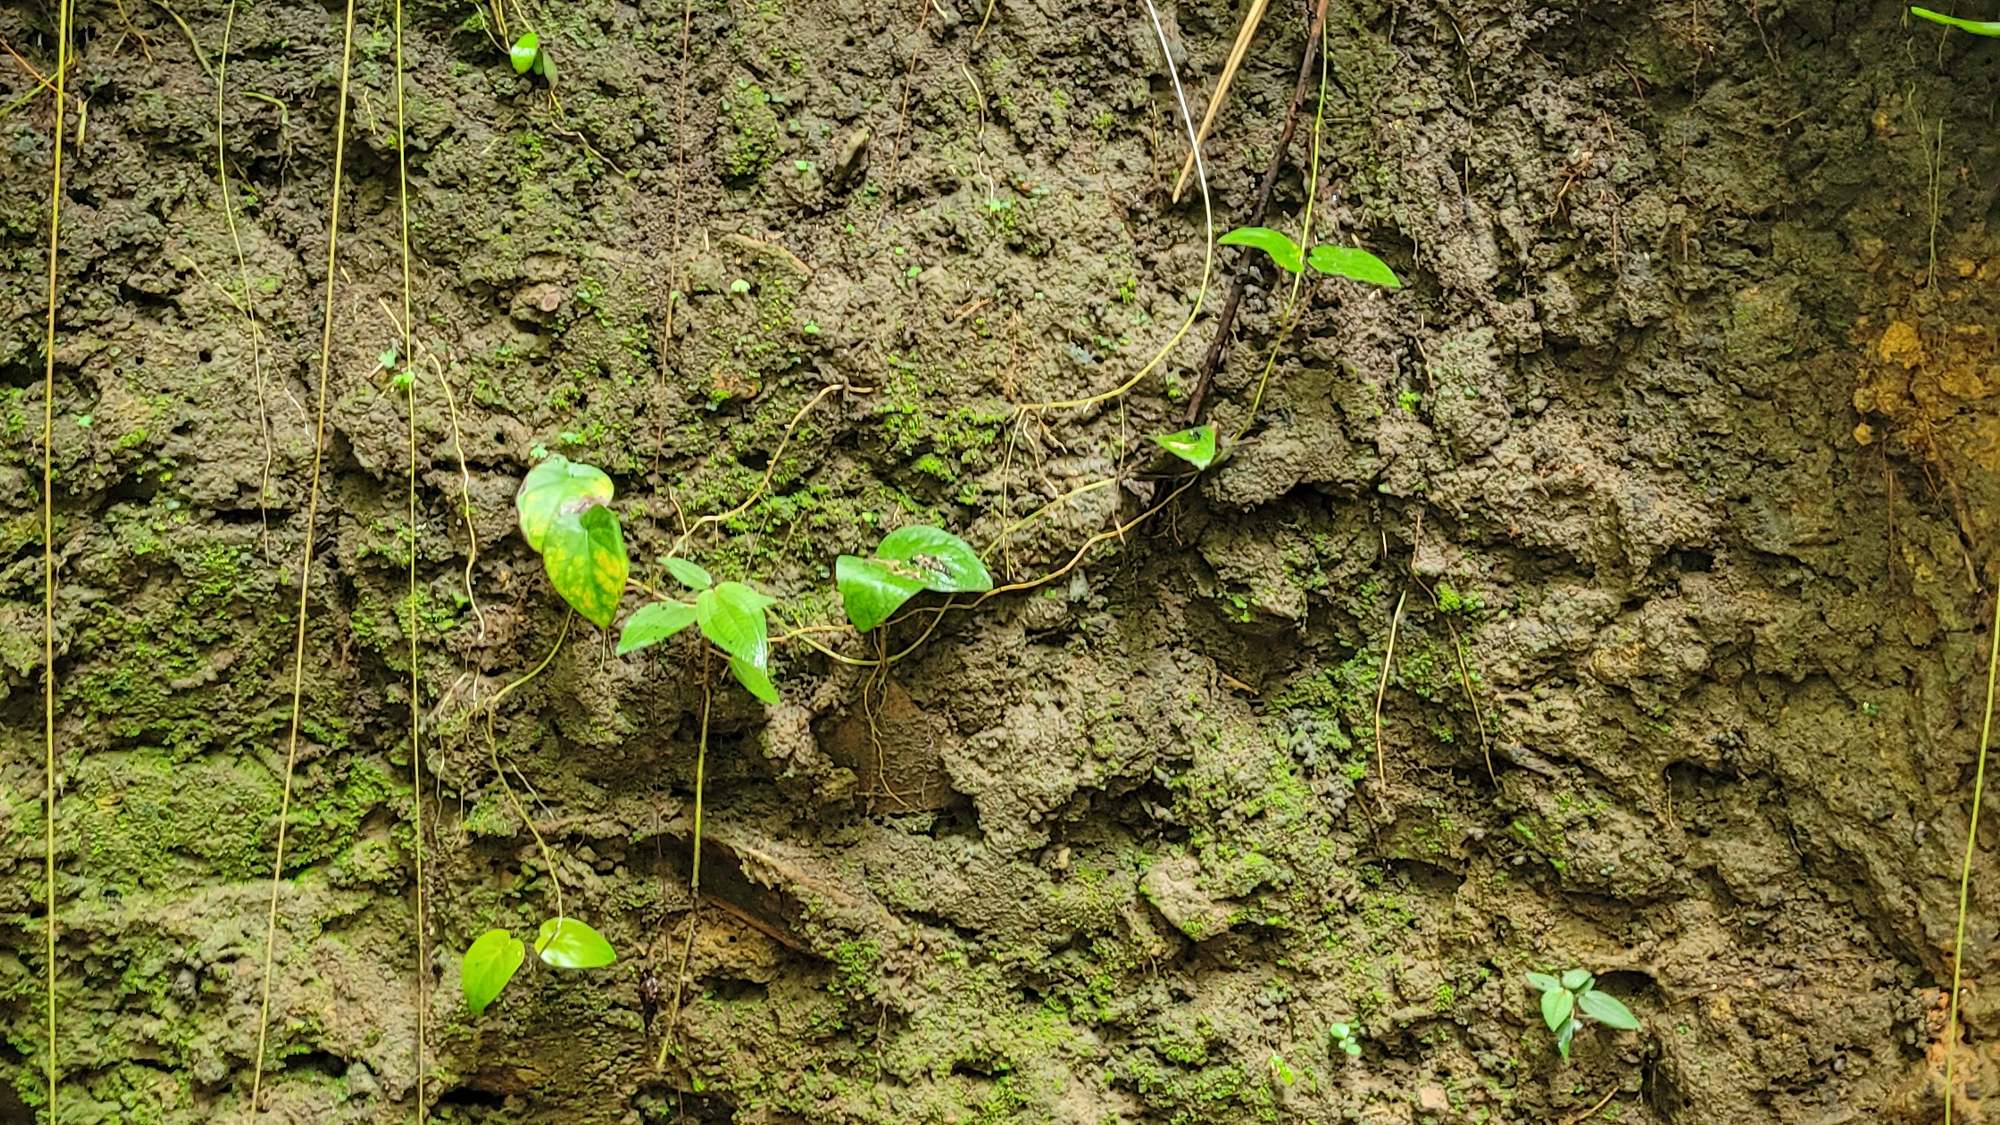 How 2000-year-old soil could be a lifeline for the Amazon rainforest